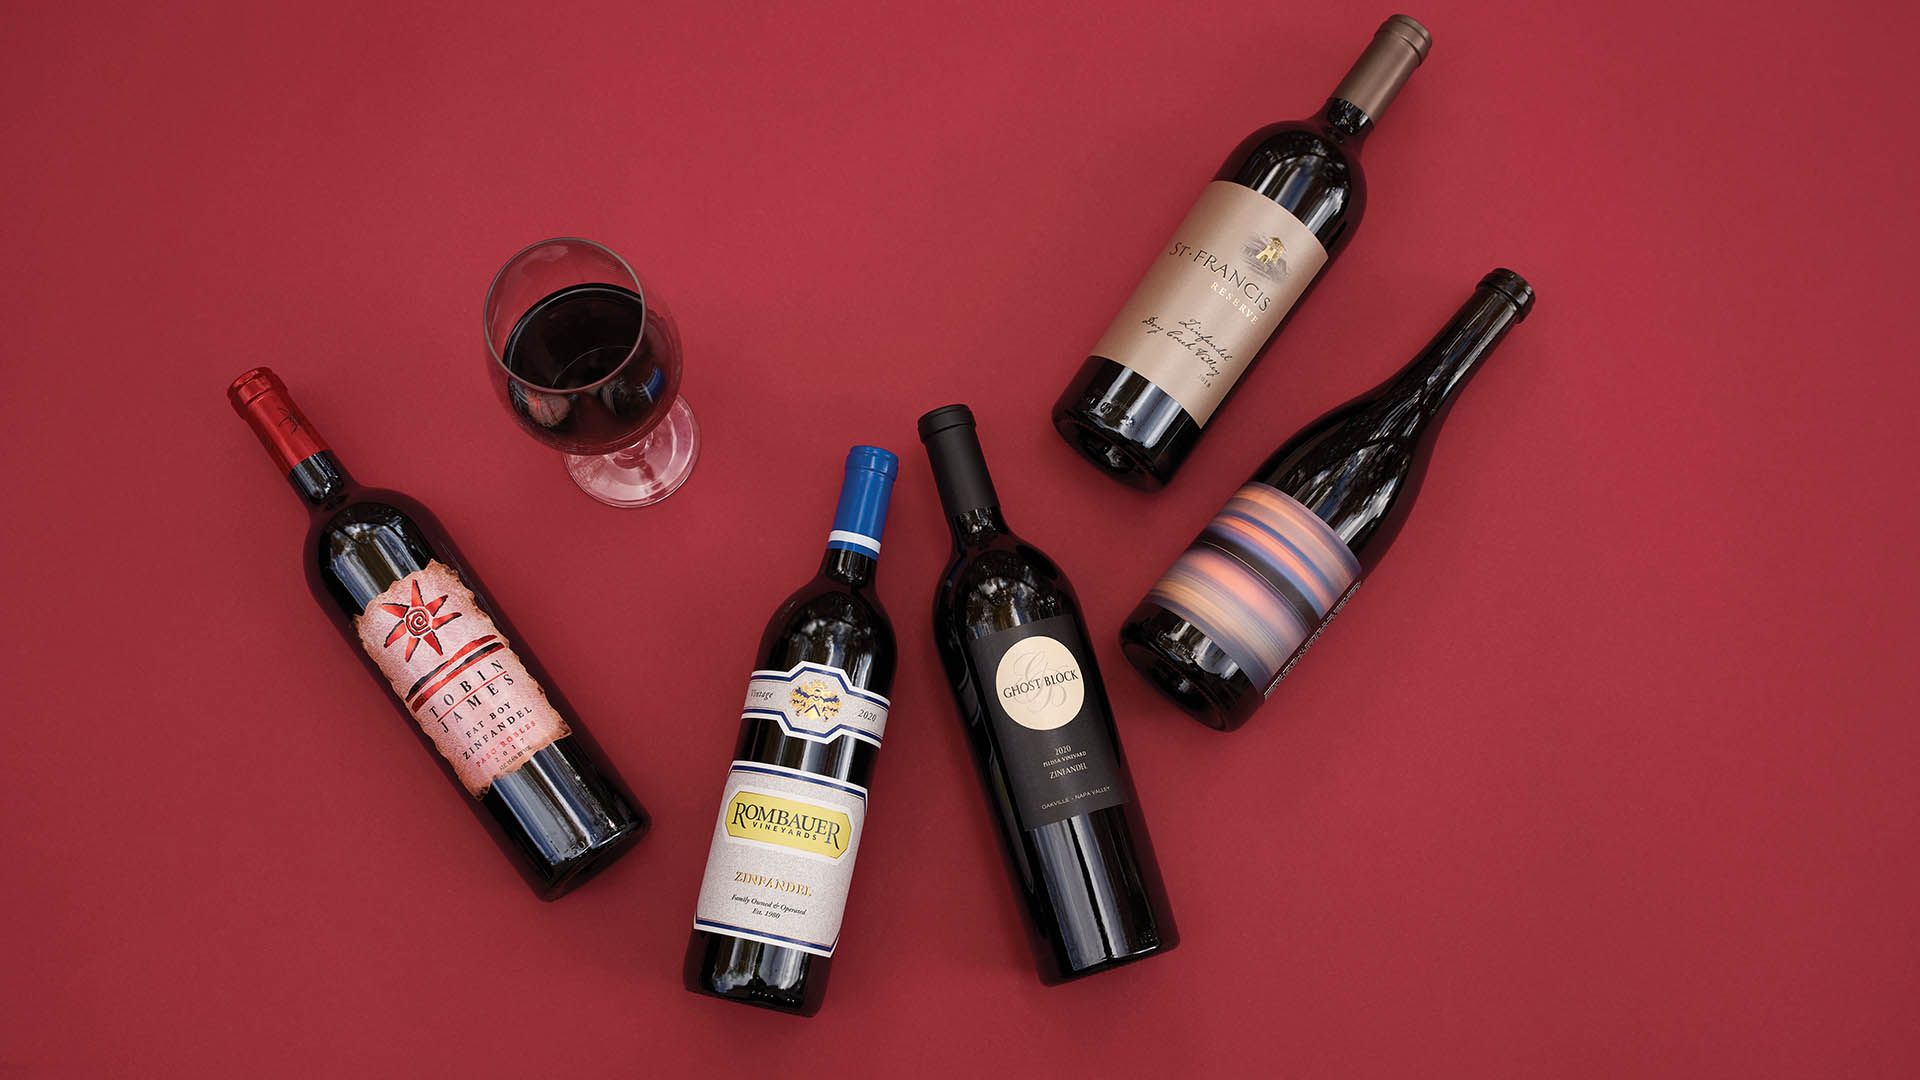 After Valentine's Day: What to drink winter 2024? The answer is simple: Zinfandel 